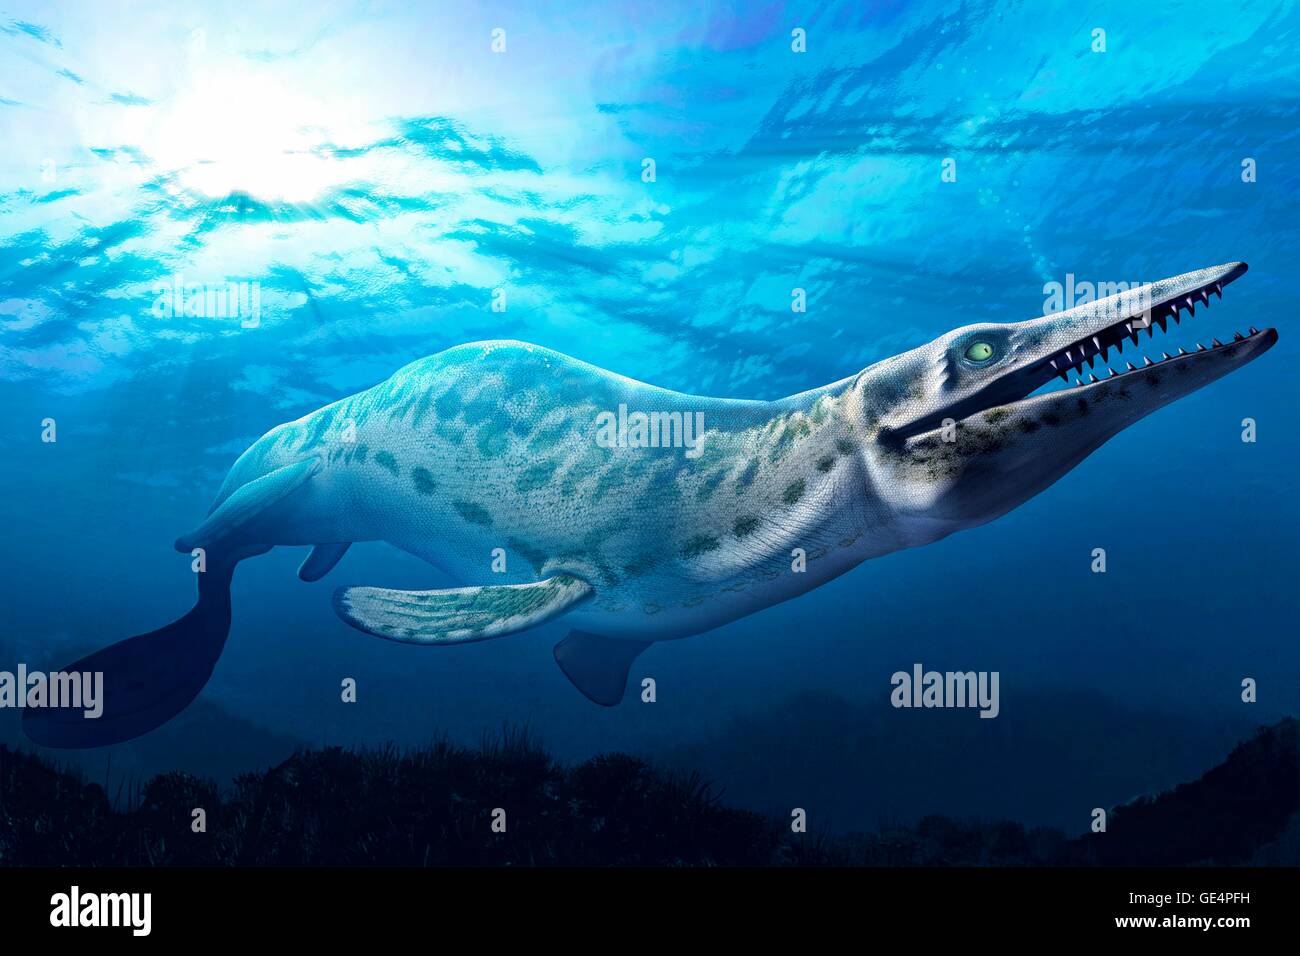 The mosasaur is an extinct marine reptile that lived 70-65 million years ago. It had a long, barrel-shaped body, paddle-like flippers and a large heavy skull. It grew over 15 metres in length and weighed roughly 15 tons. Stock Photo